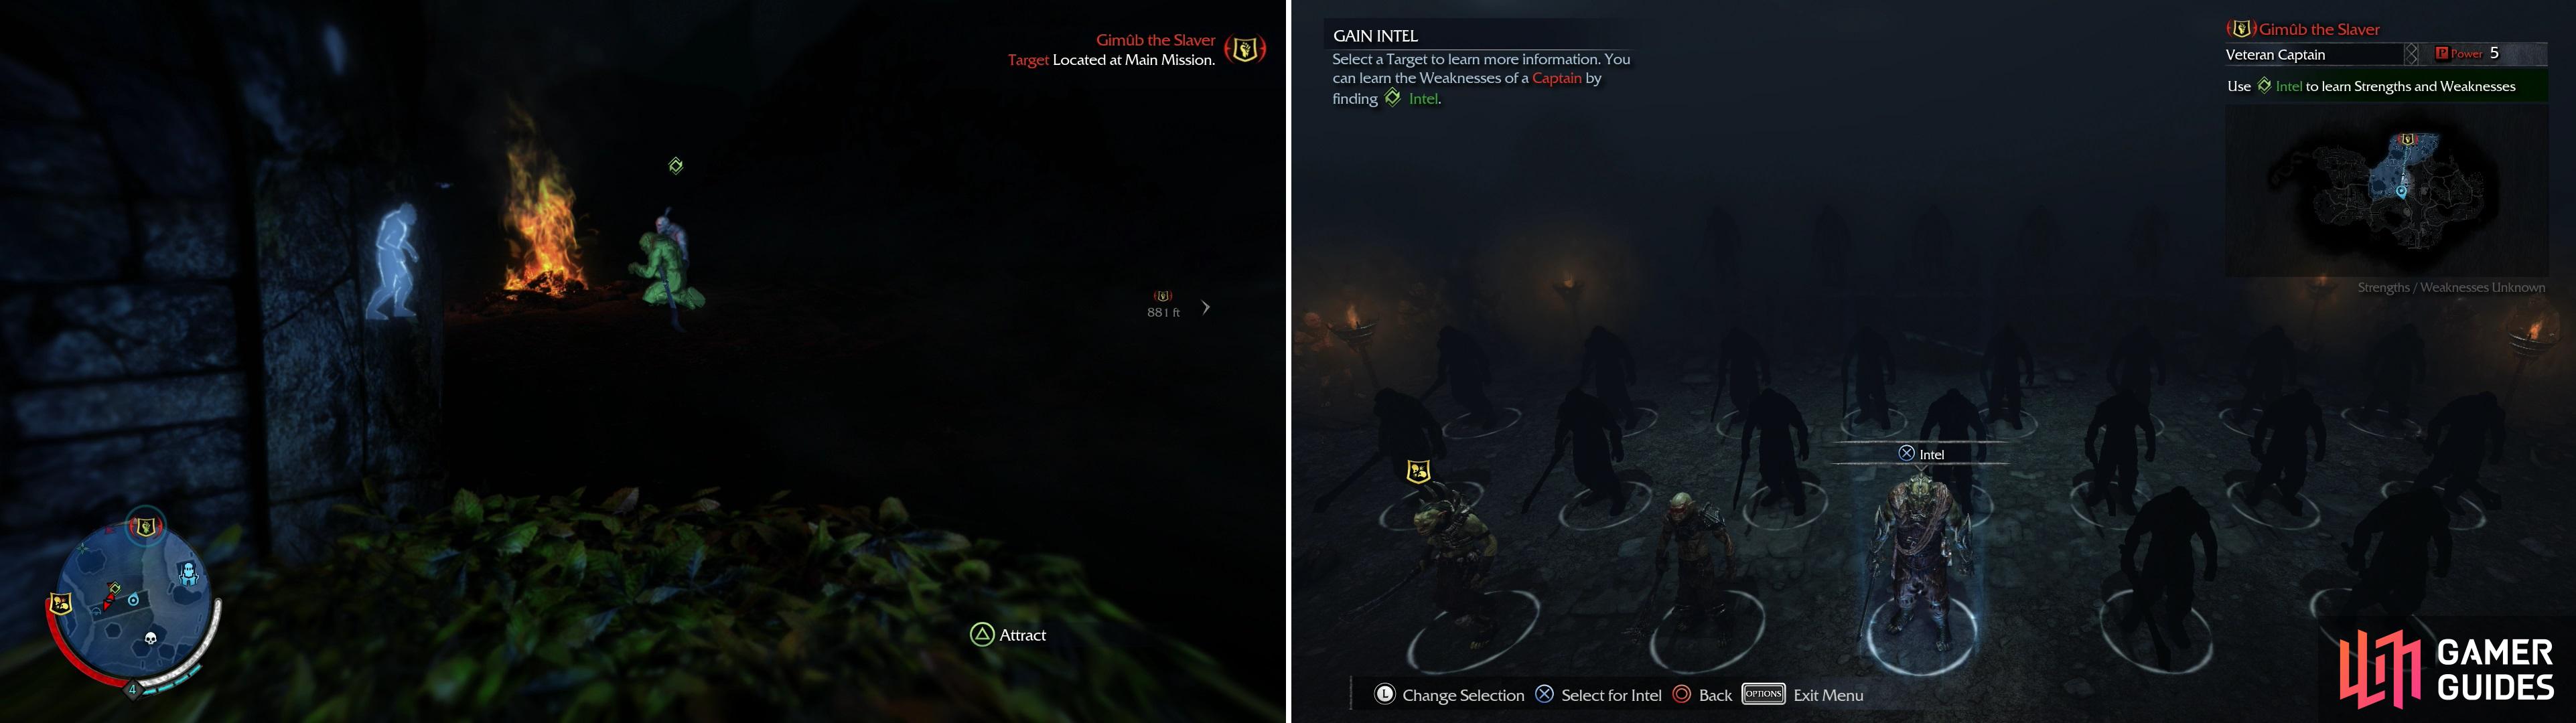 Worms are one common source of Intel-Uruks who, once Interrogated by the Wraith will divulge their precious knowledge about their masters. They have a green icon over them, and glow green in Wraith Vision (left). Gain Intel to learn more about Sauron's Army (right).